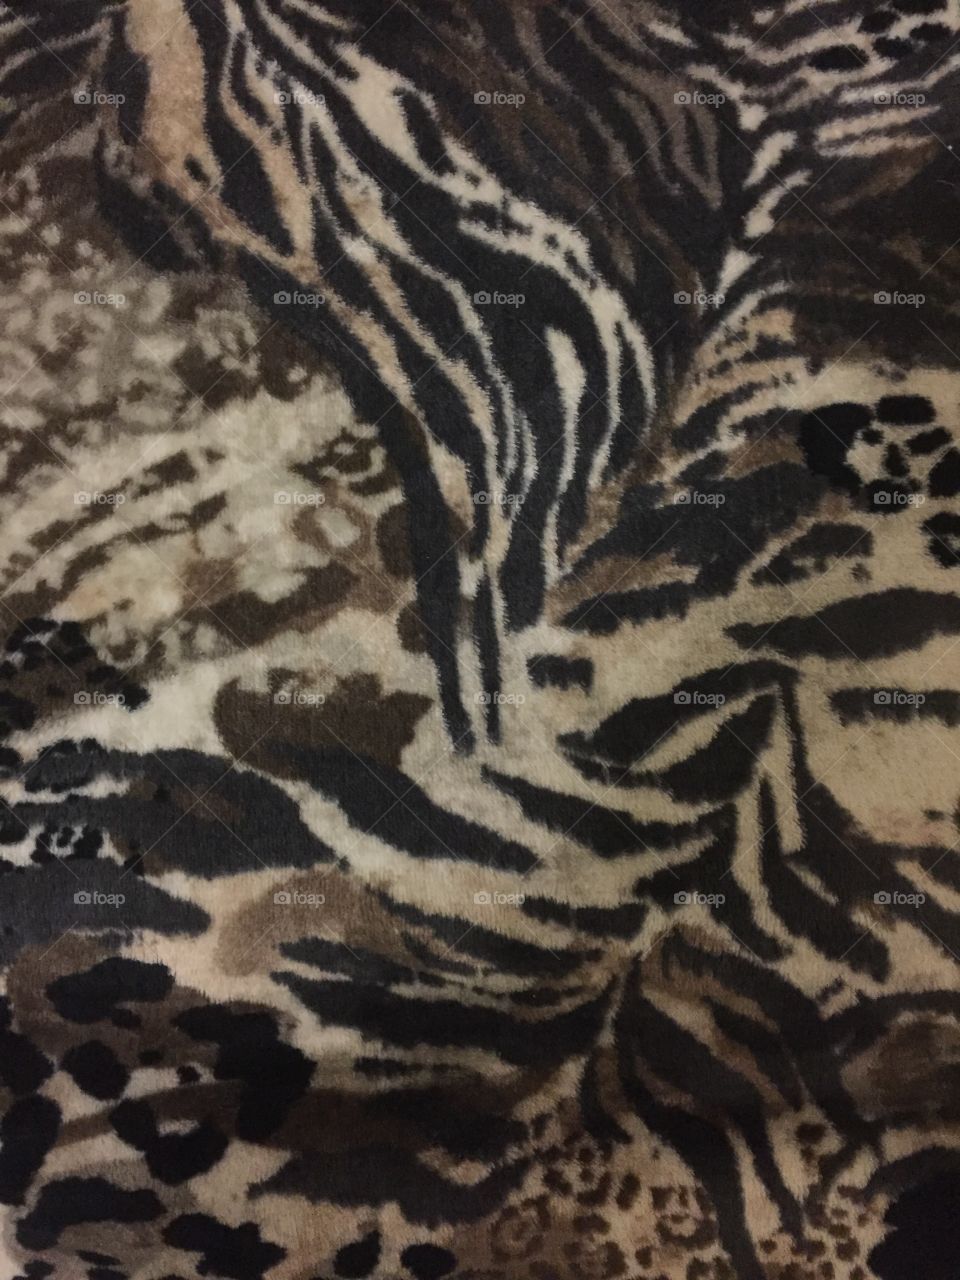 Swirls and twirls of a jungled themed throw.  Warm and cozy with great decor attributes 